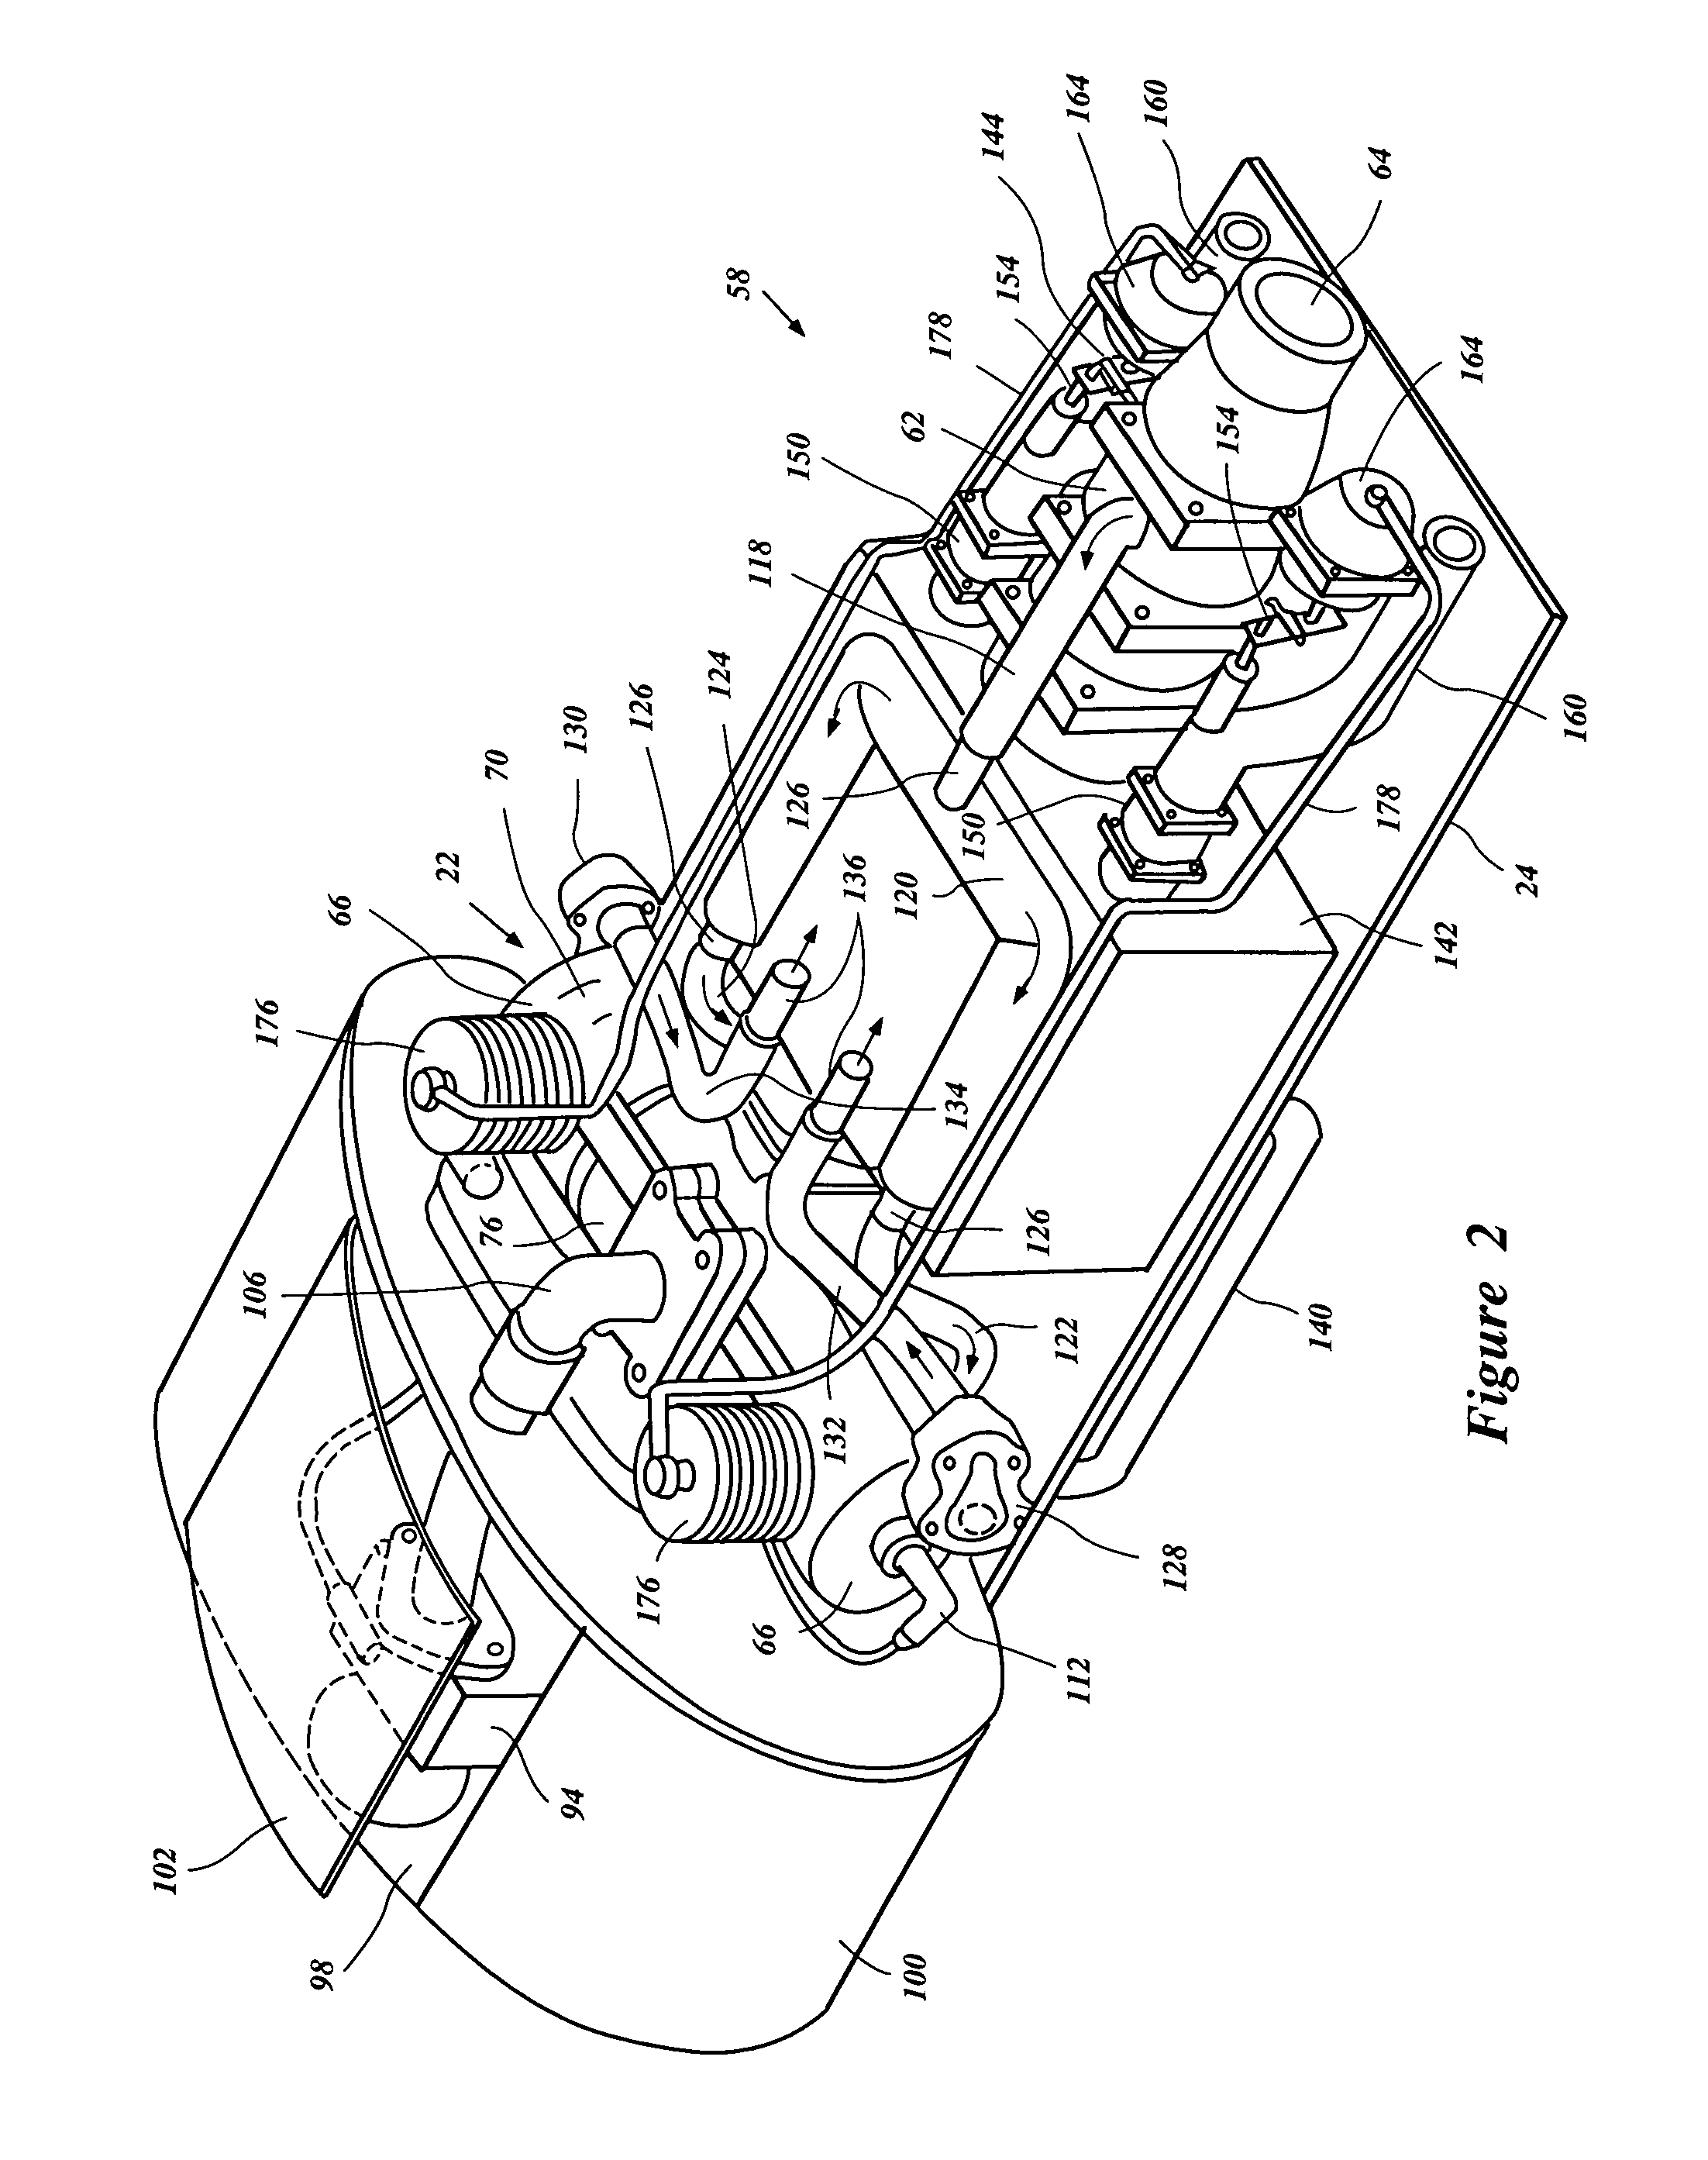 Water preclusion device for marine engine